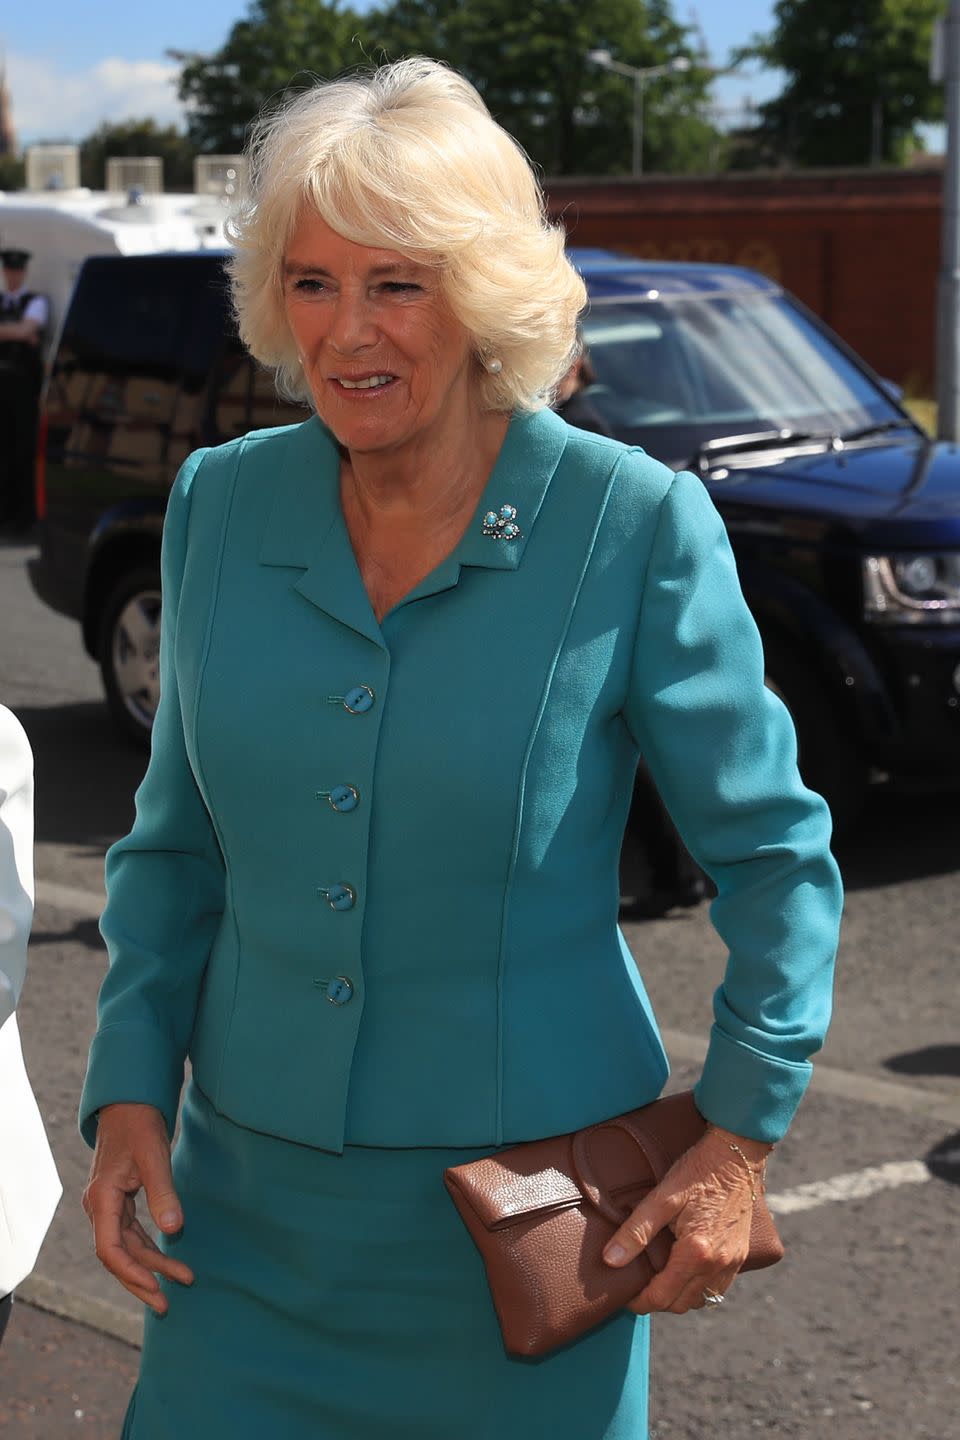 <p>During a trip to Northern Ireland, the Duchess adorned a bright blue suit with a shamrock pin. She also carried a small brown clutch for her visit to the Belfast Welcome Organisation, which provides support to people affected by homelessness.</p>